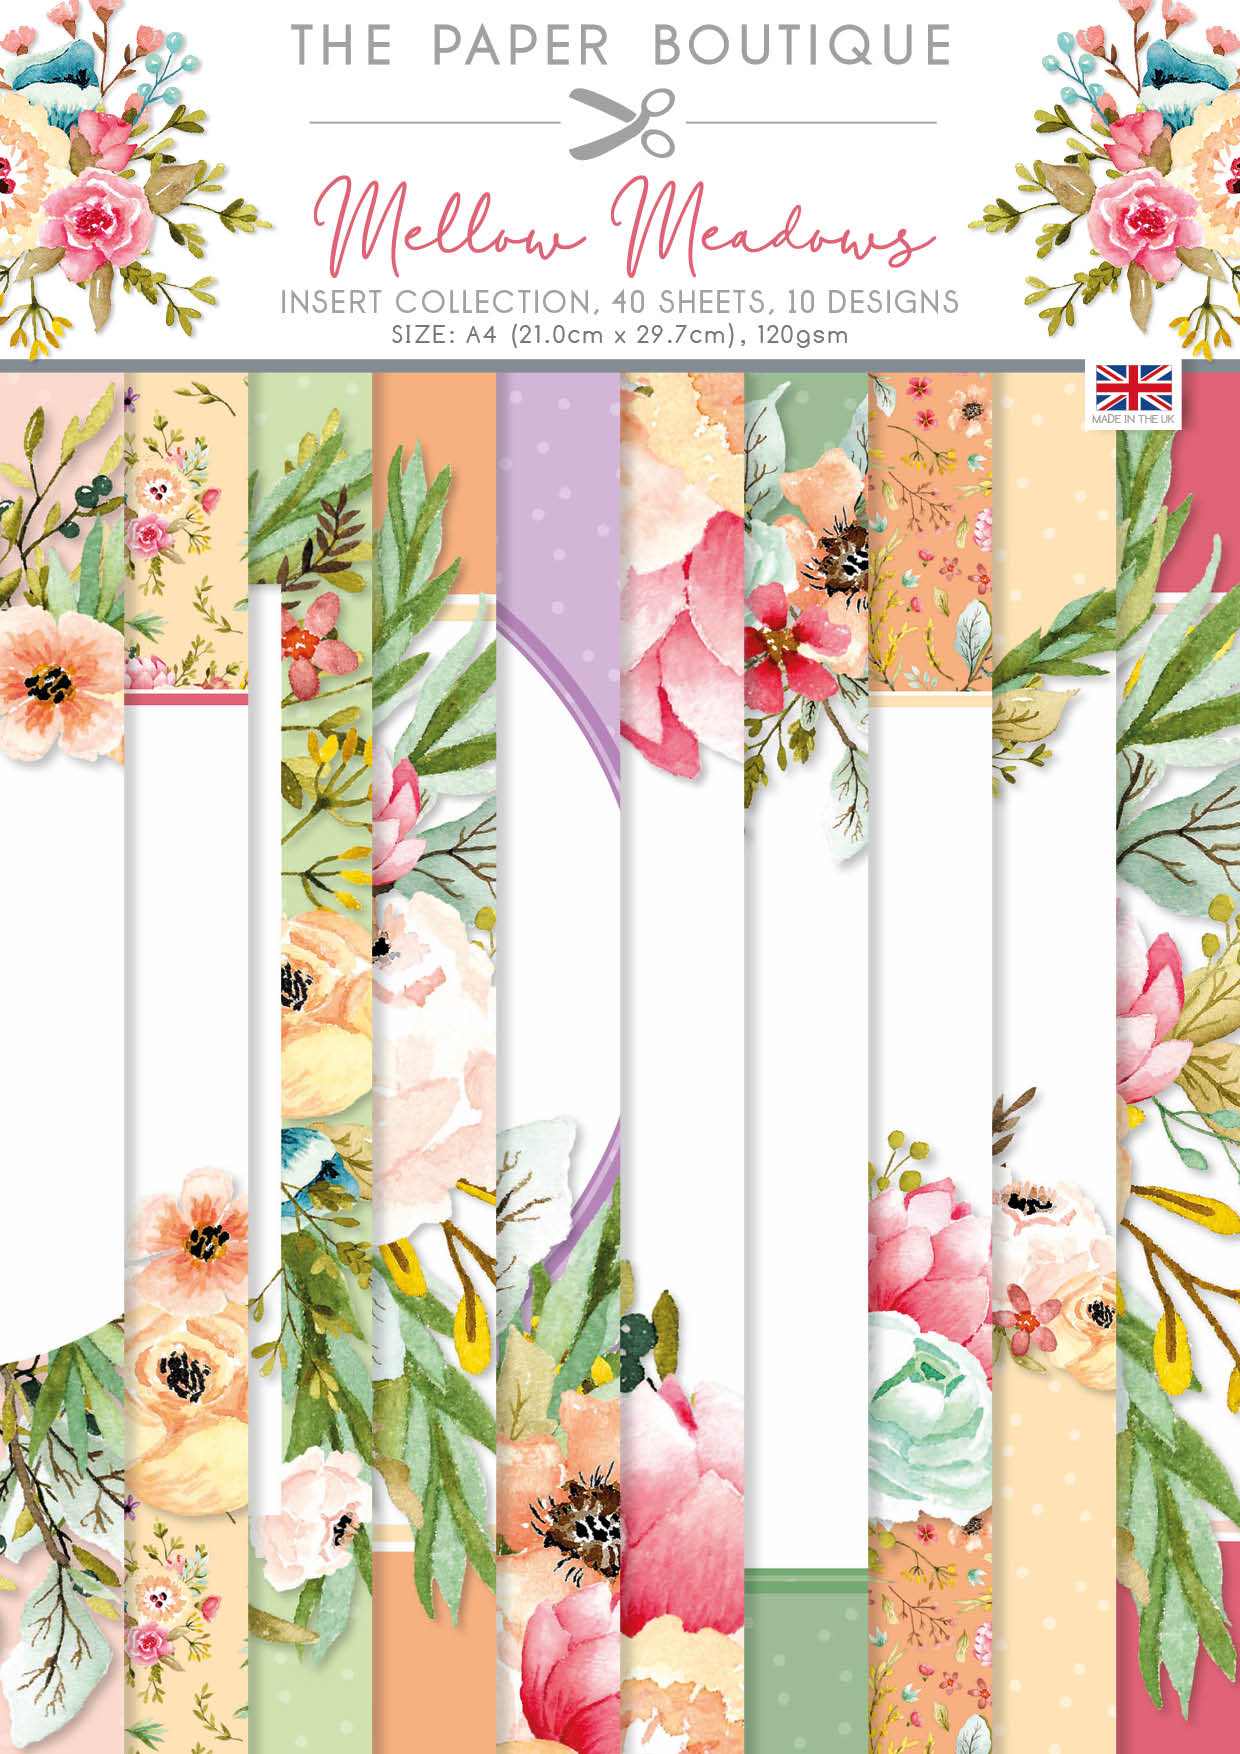 The Paper Boutique Mellow Meadows Insert Collection